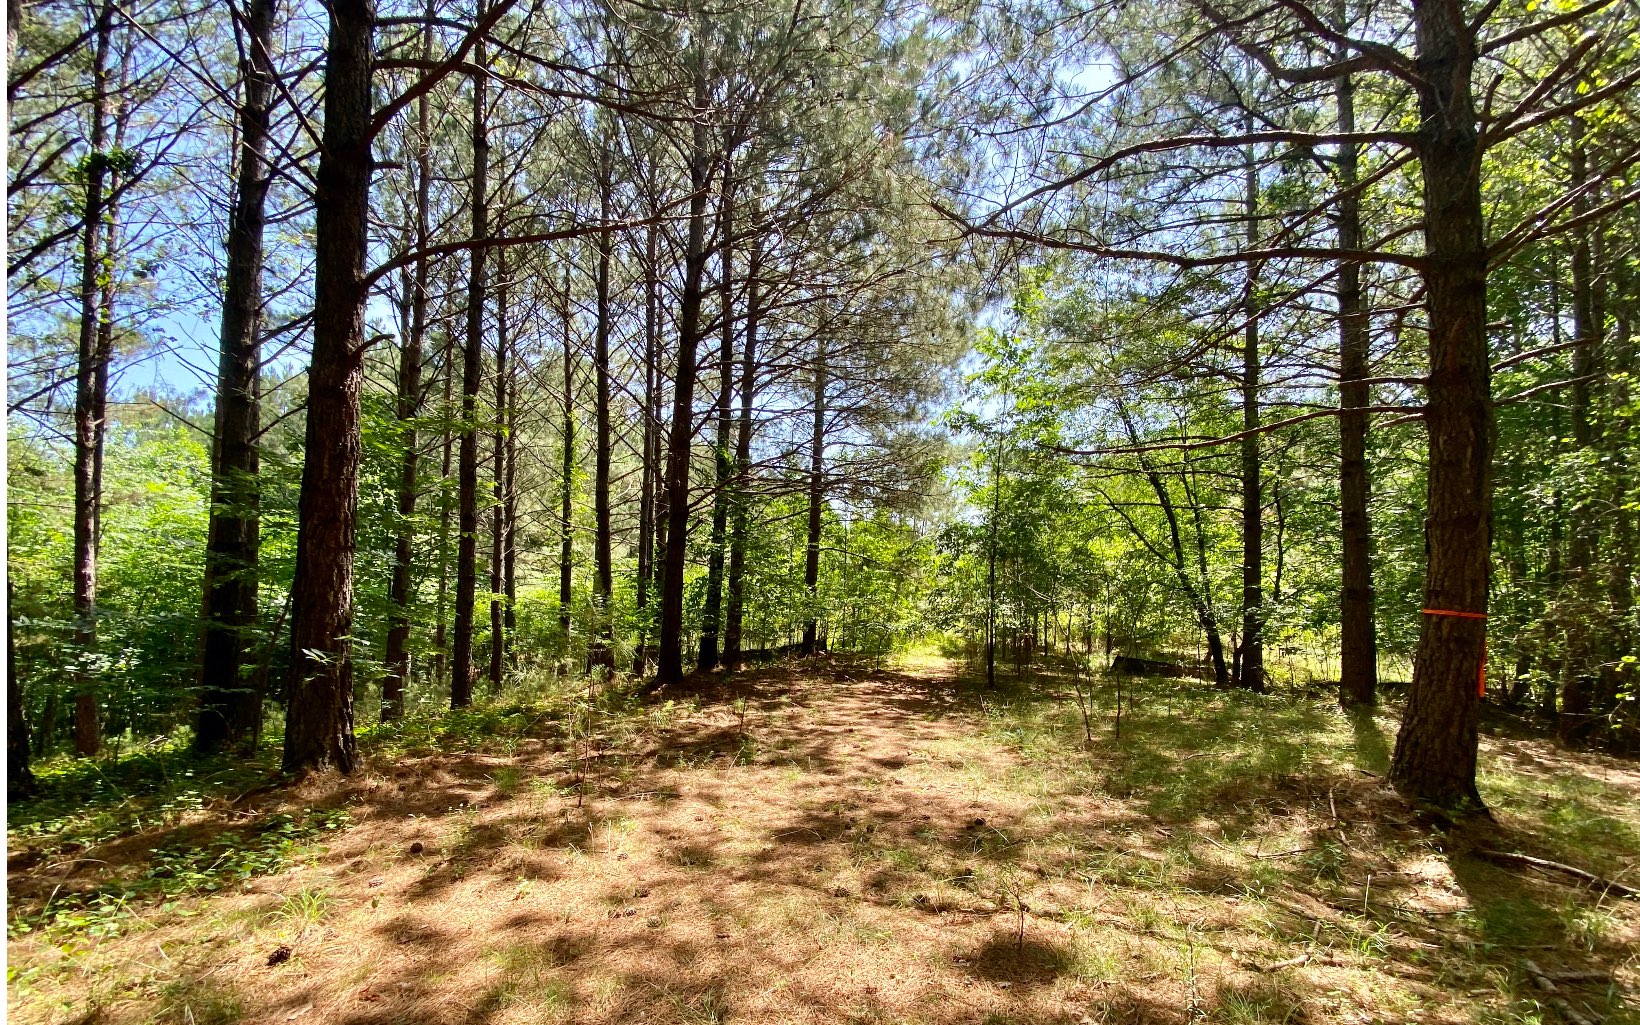 BEAUTIFUL 3.85 Acre BUILDING LOT in the North Georgia Mountains!!! Located in Sassafras Mountain, a Beautiful Gated Community with Paved Roads and Underground Utilities. READY TO BUILD - Just bring your Builder - Soil Test Complete and ES & PC Plan (Tertiary Plan) Complete. You can even get the One Level with Full Basement House Plans.